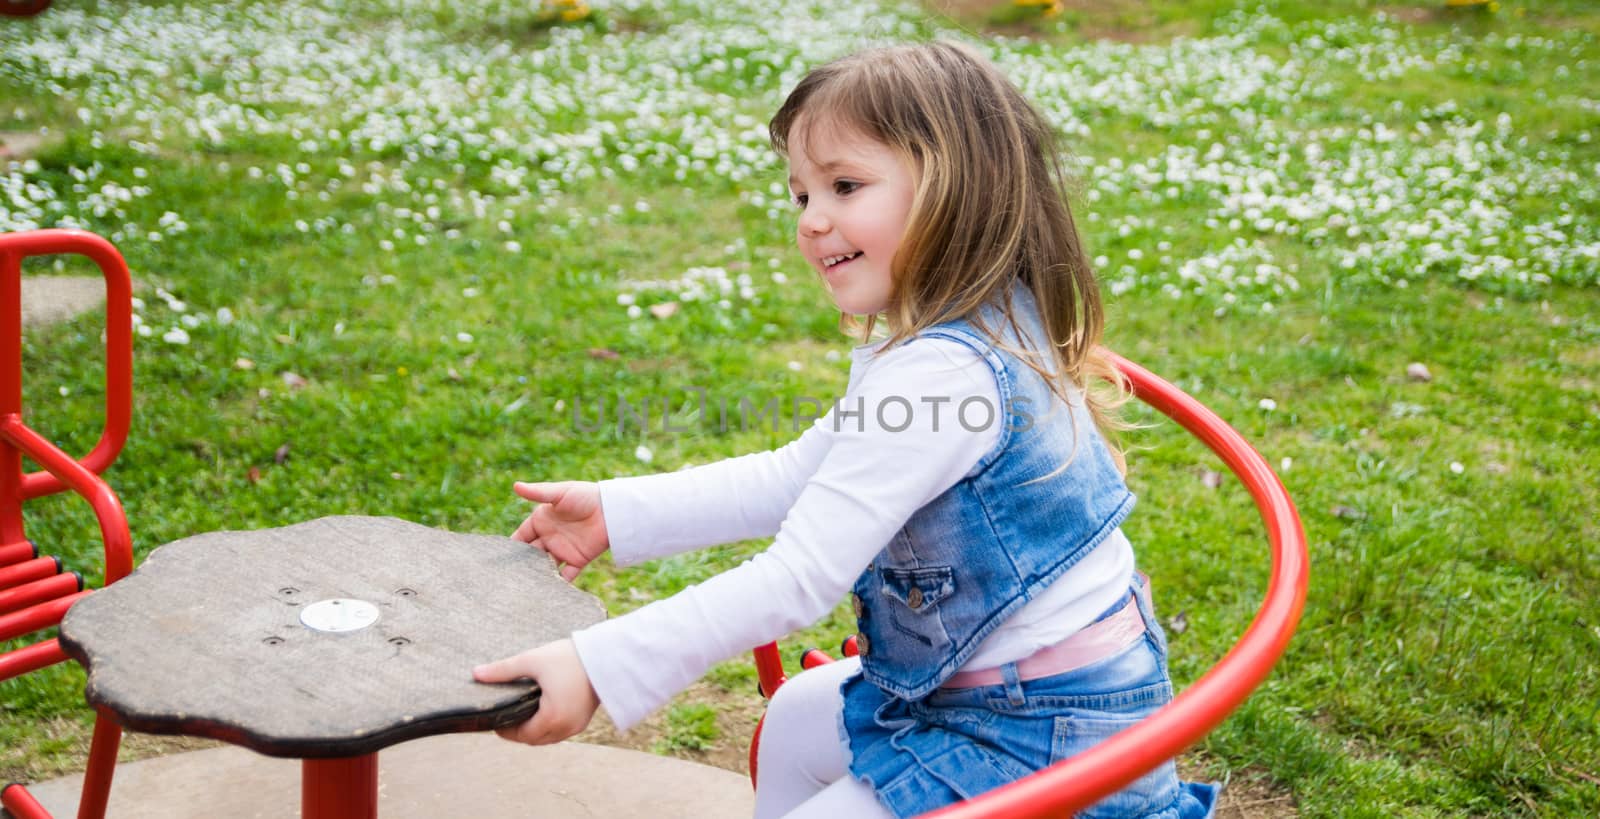 little girl turns into a red carousel in an outdoor playground by Isaac74